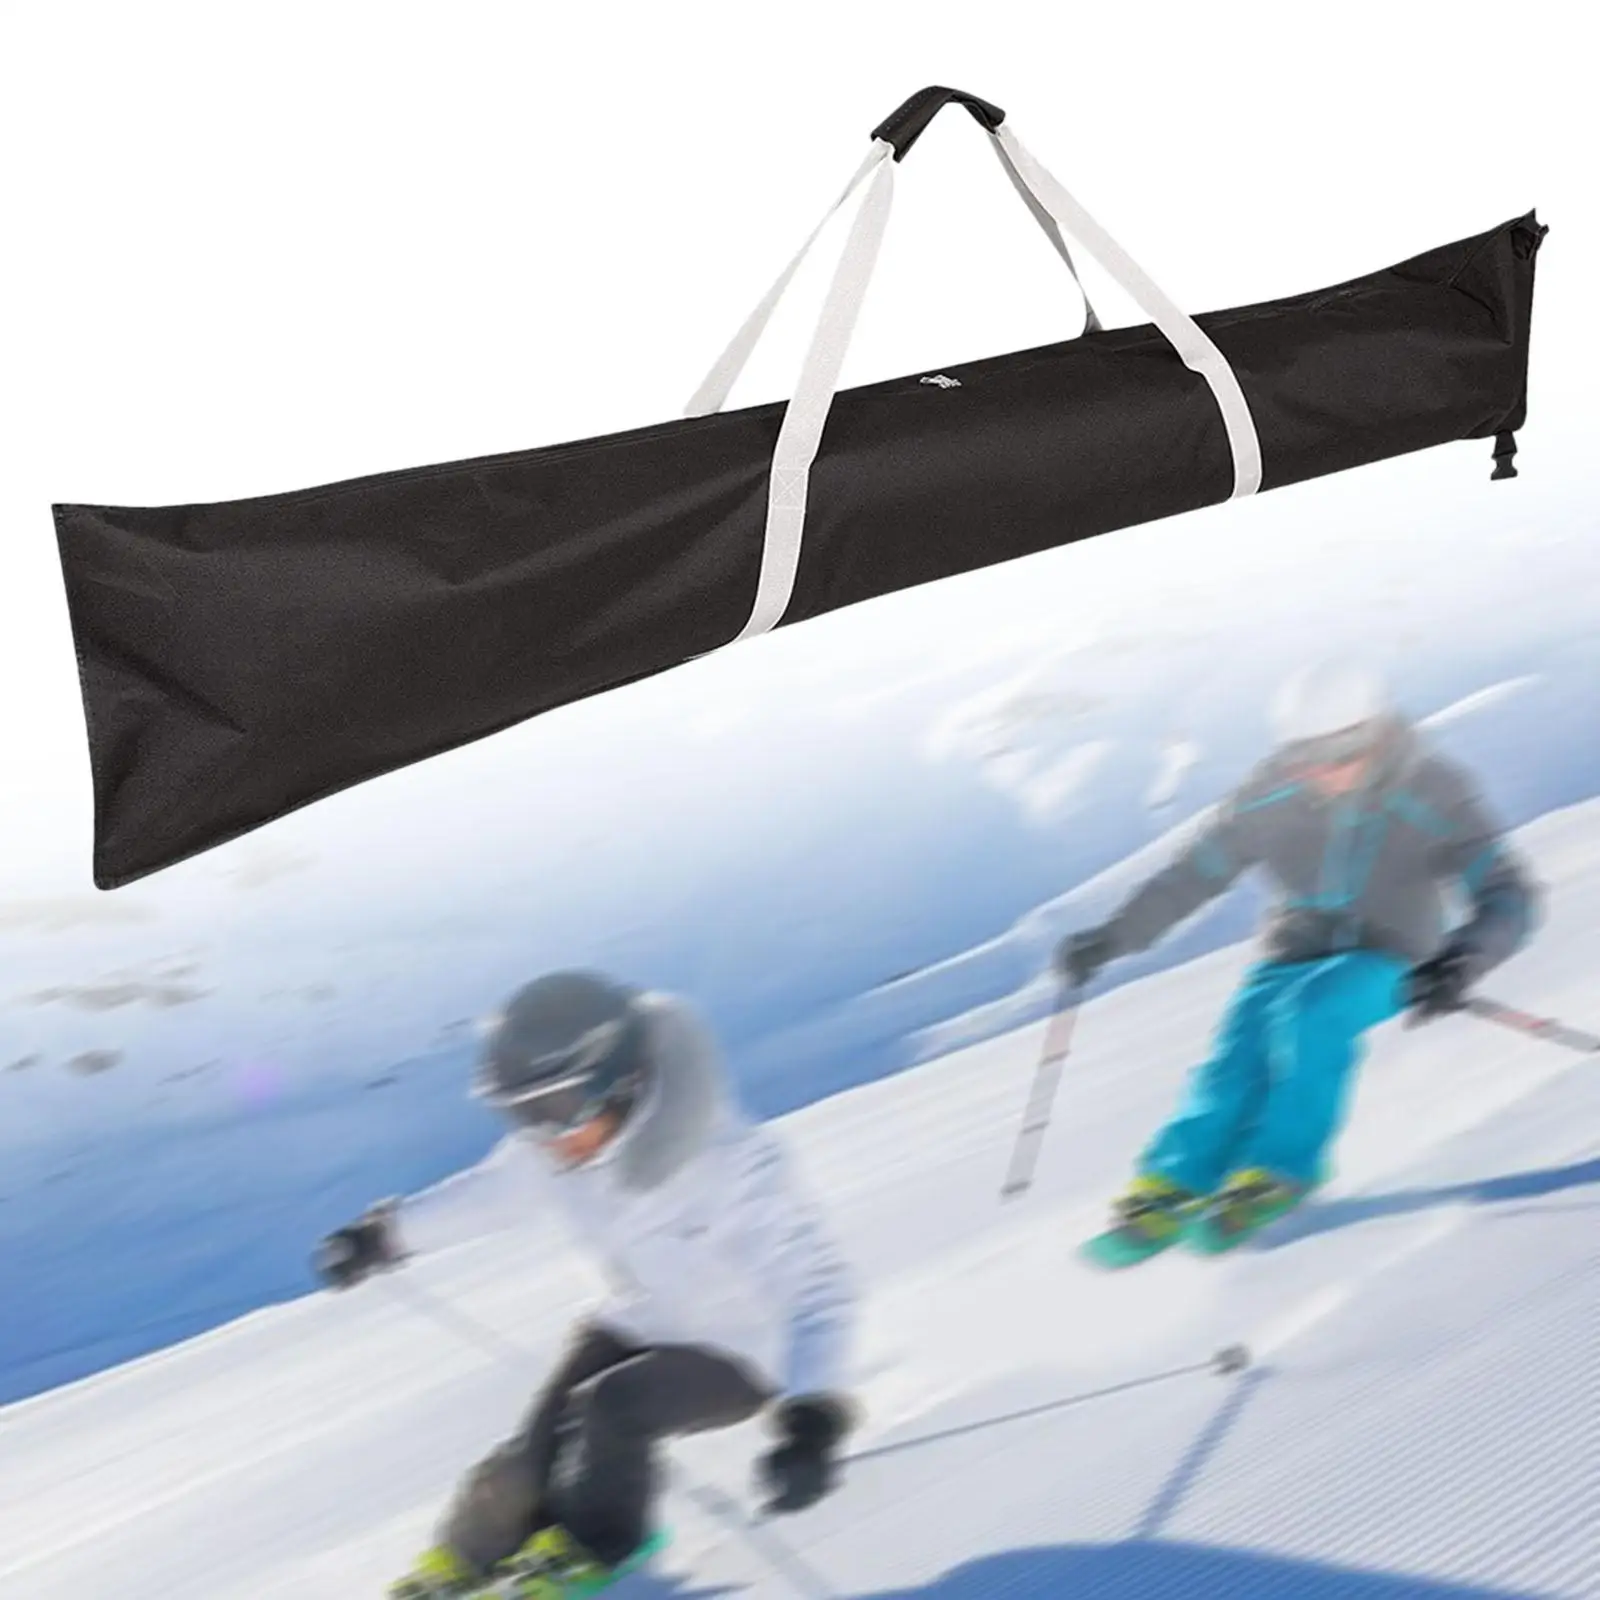 Ski Bag Snow Travel Transport with Handle Snowboard Equipment Protective Snowboards Poles Bag for Skiing Winter Sports Outdoor